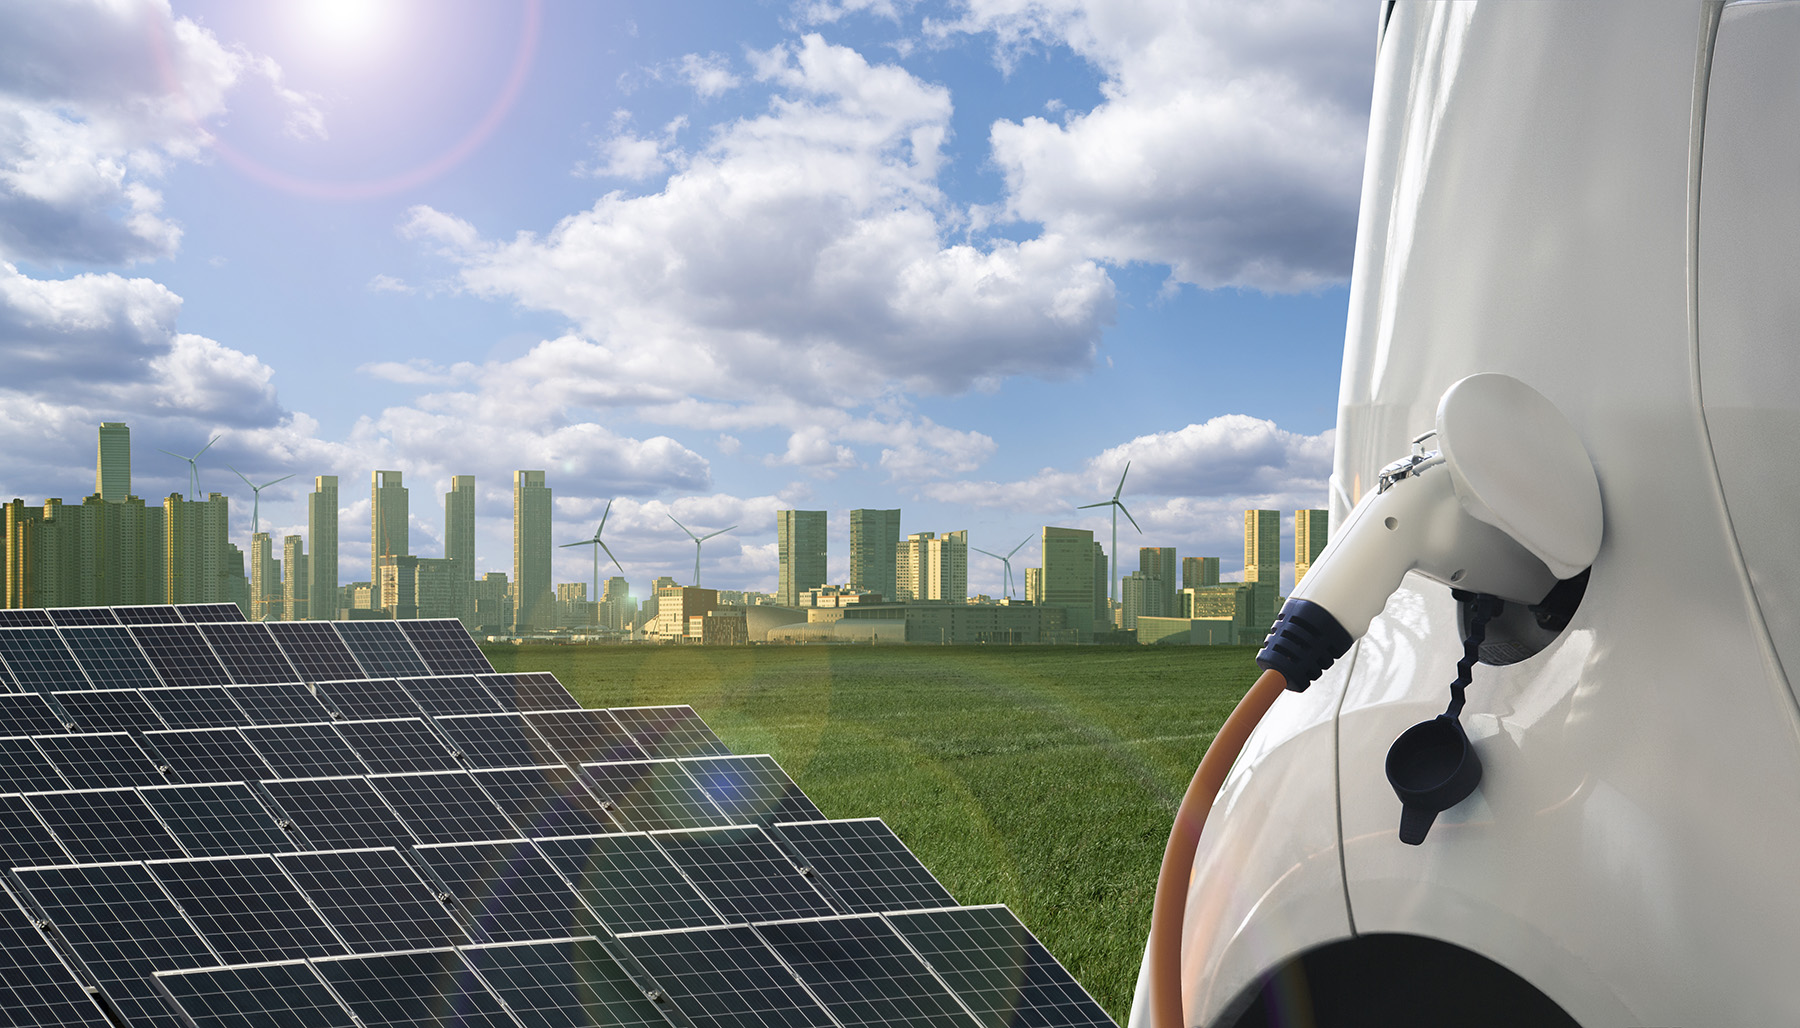 solar panels and a nozzle filling a gas tank in the foreground and a cityscape and windmills in the background 